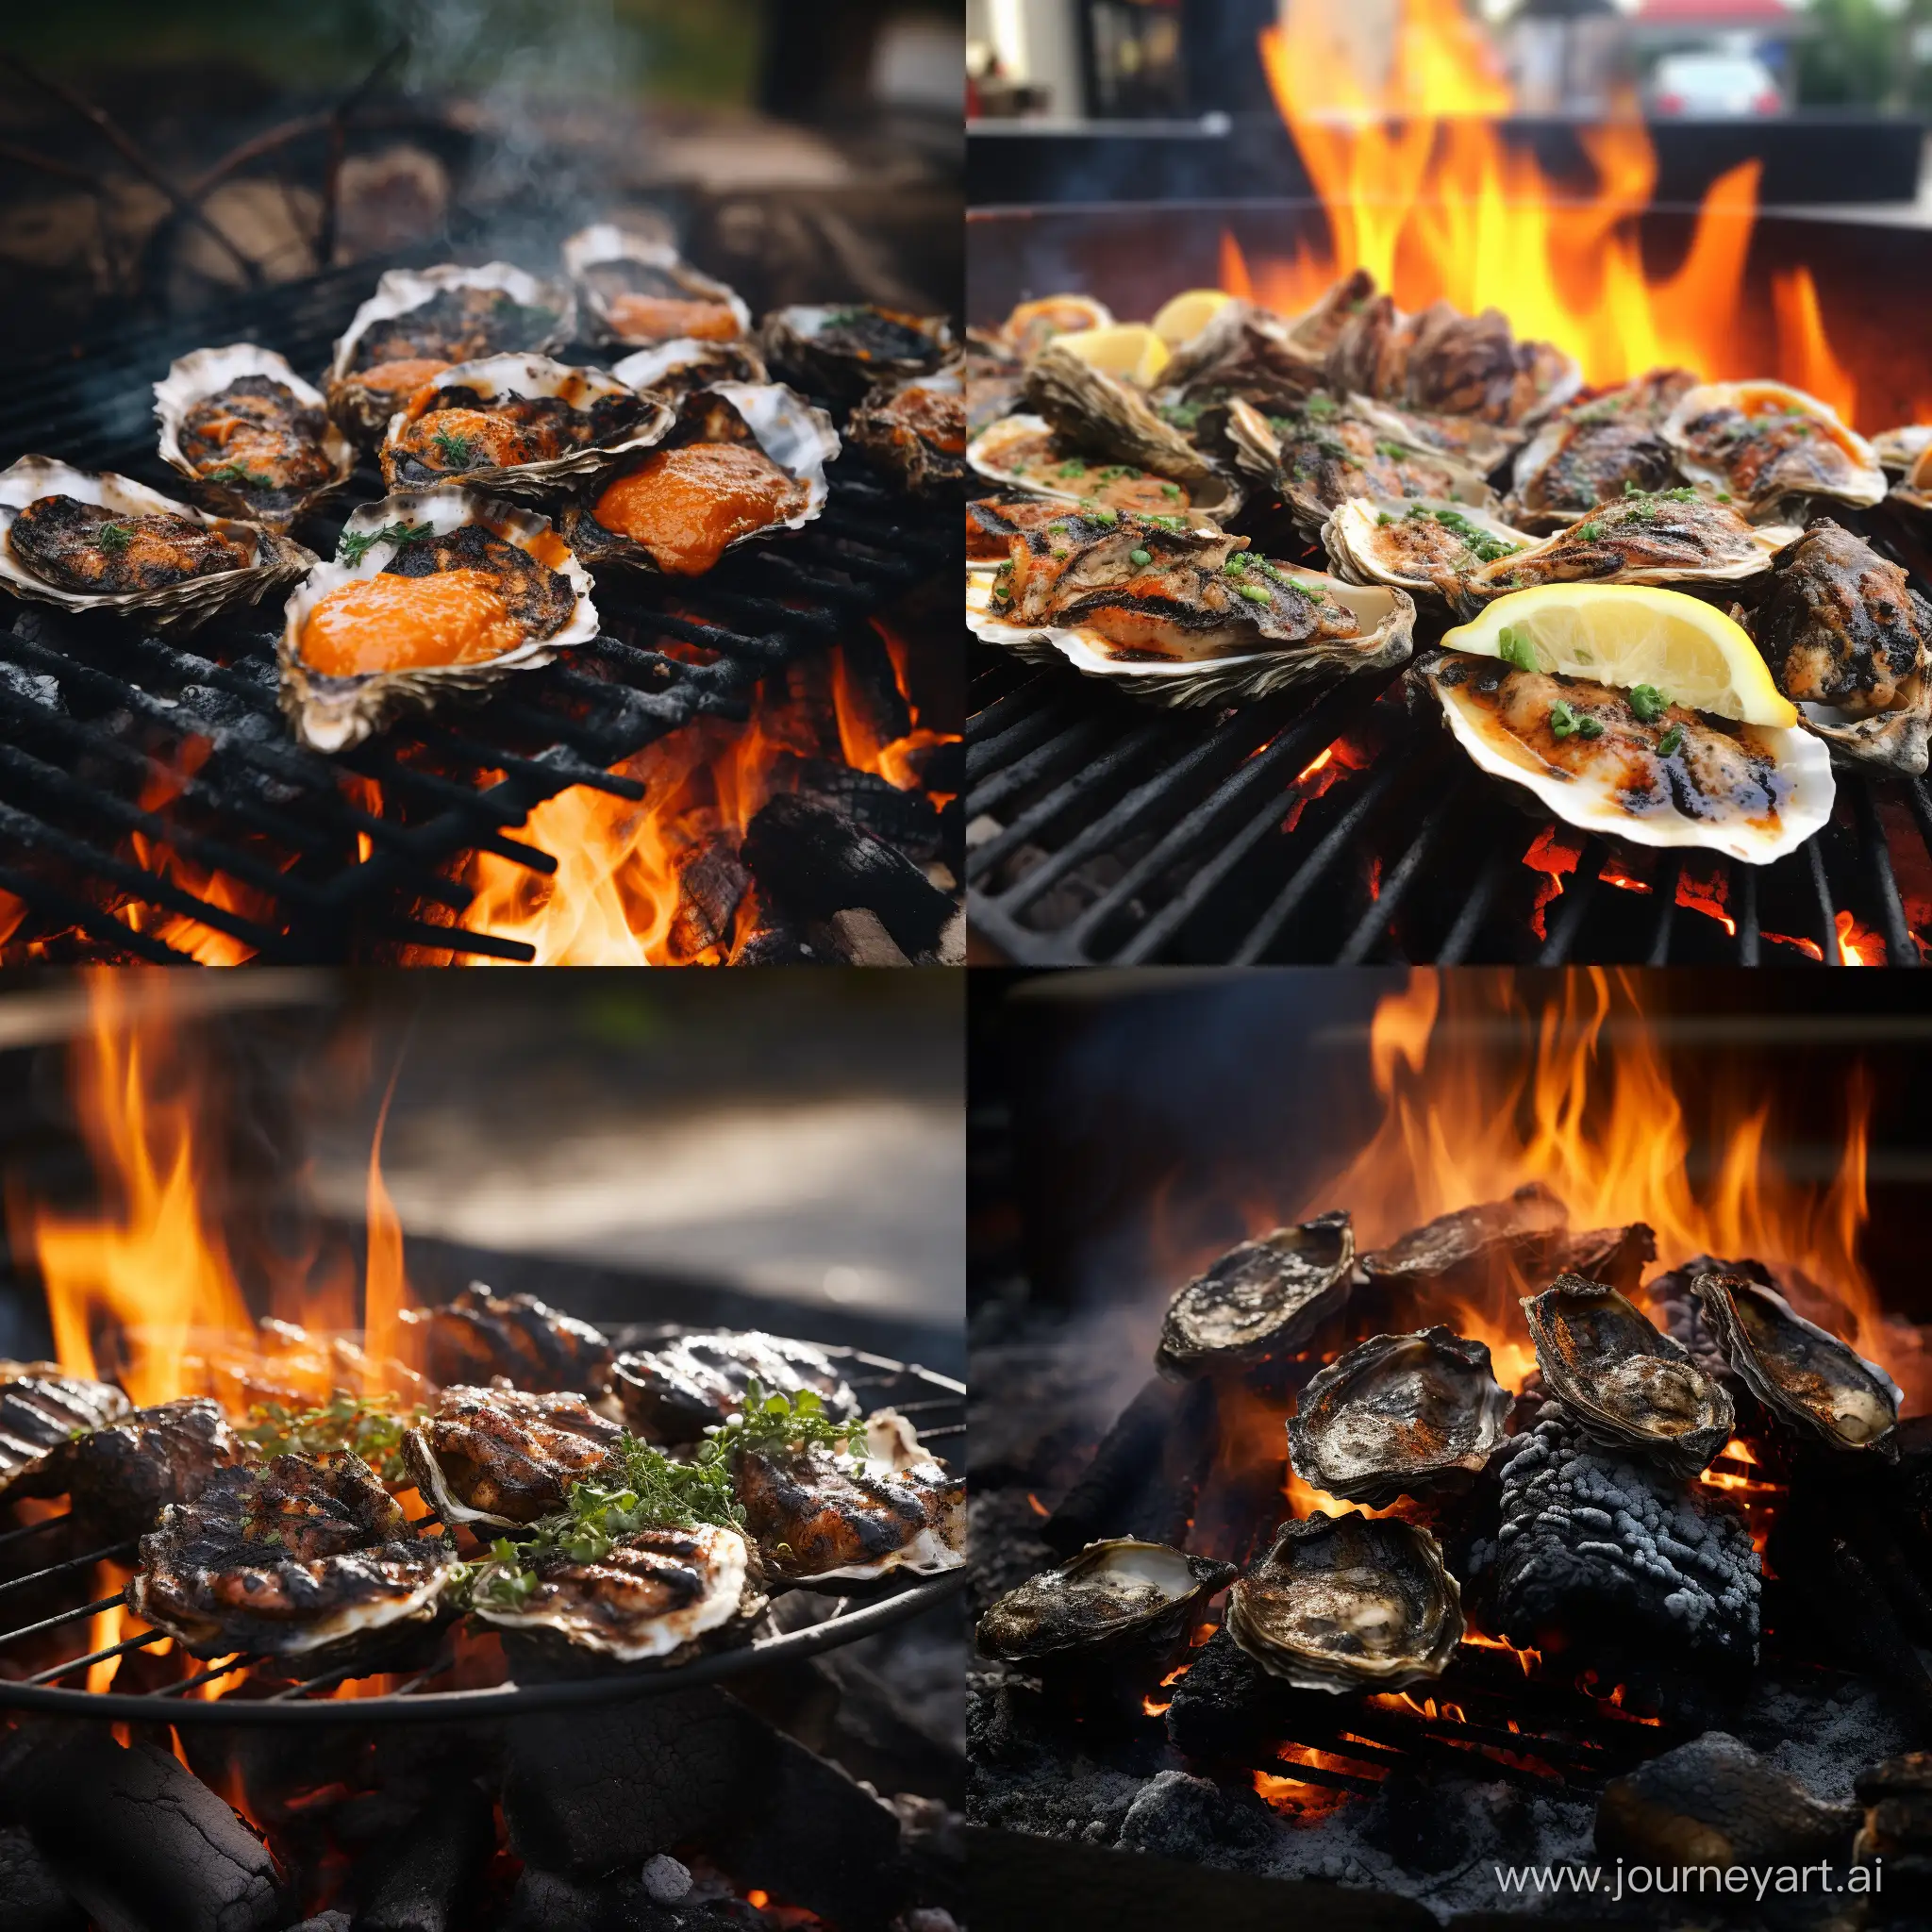 Savoring-CharcoalGrilled-Oysters-Delicacy